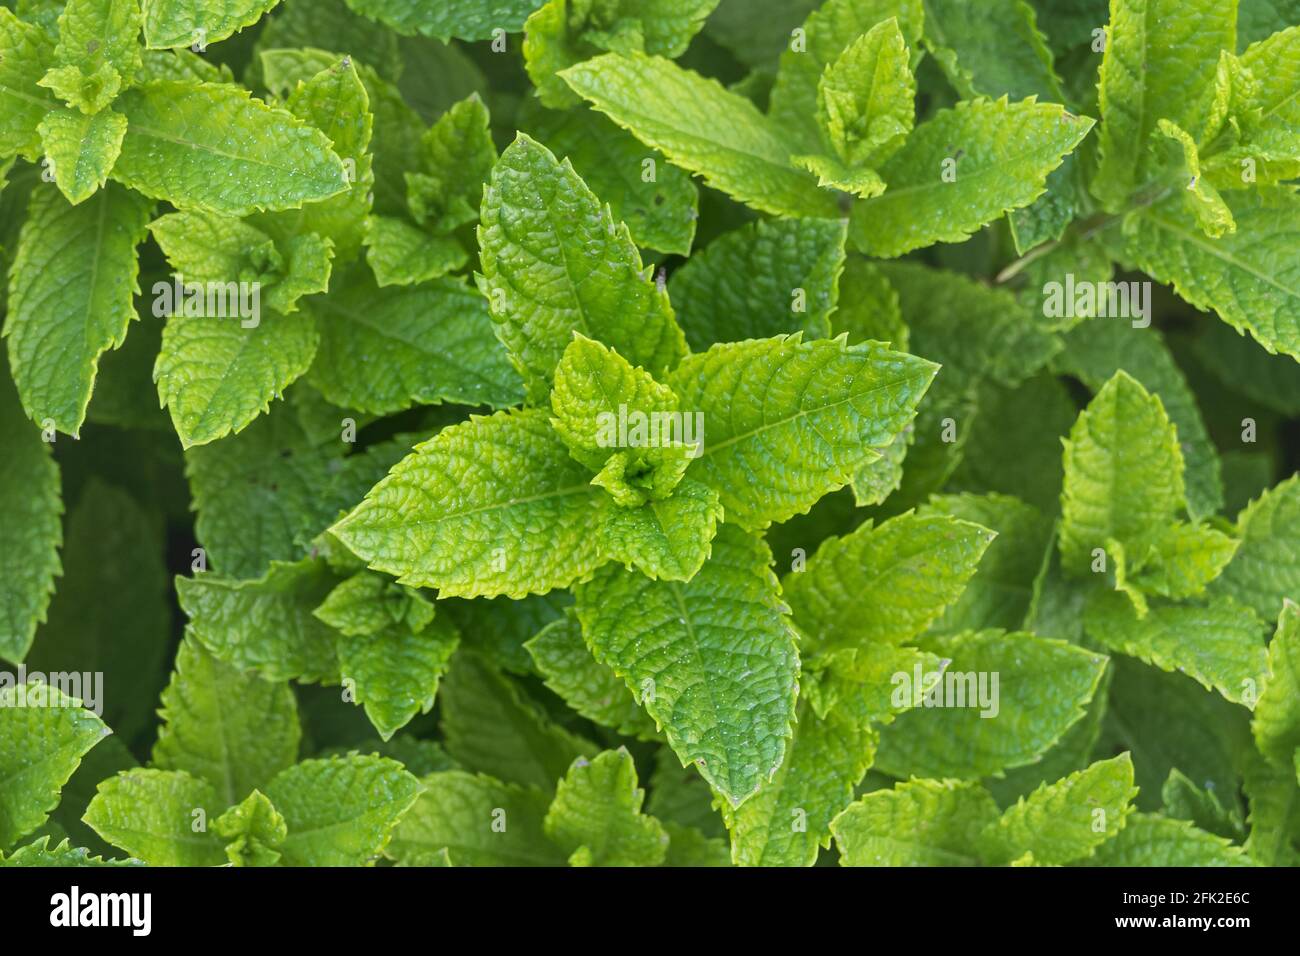 spearmint plants growing outdoor in a garden seen from above Stock Photo